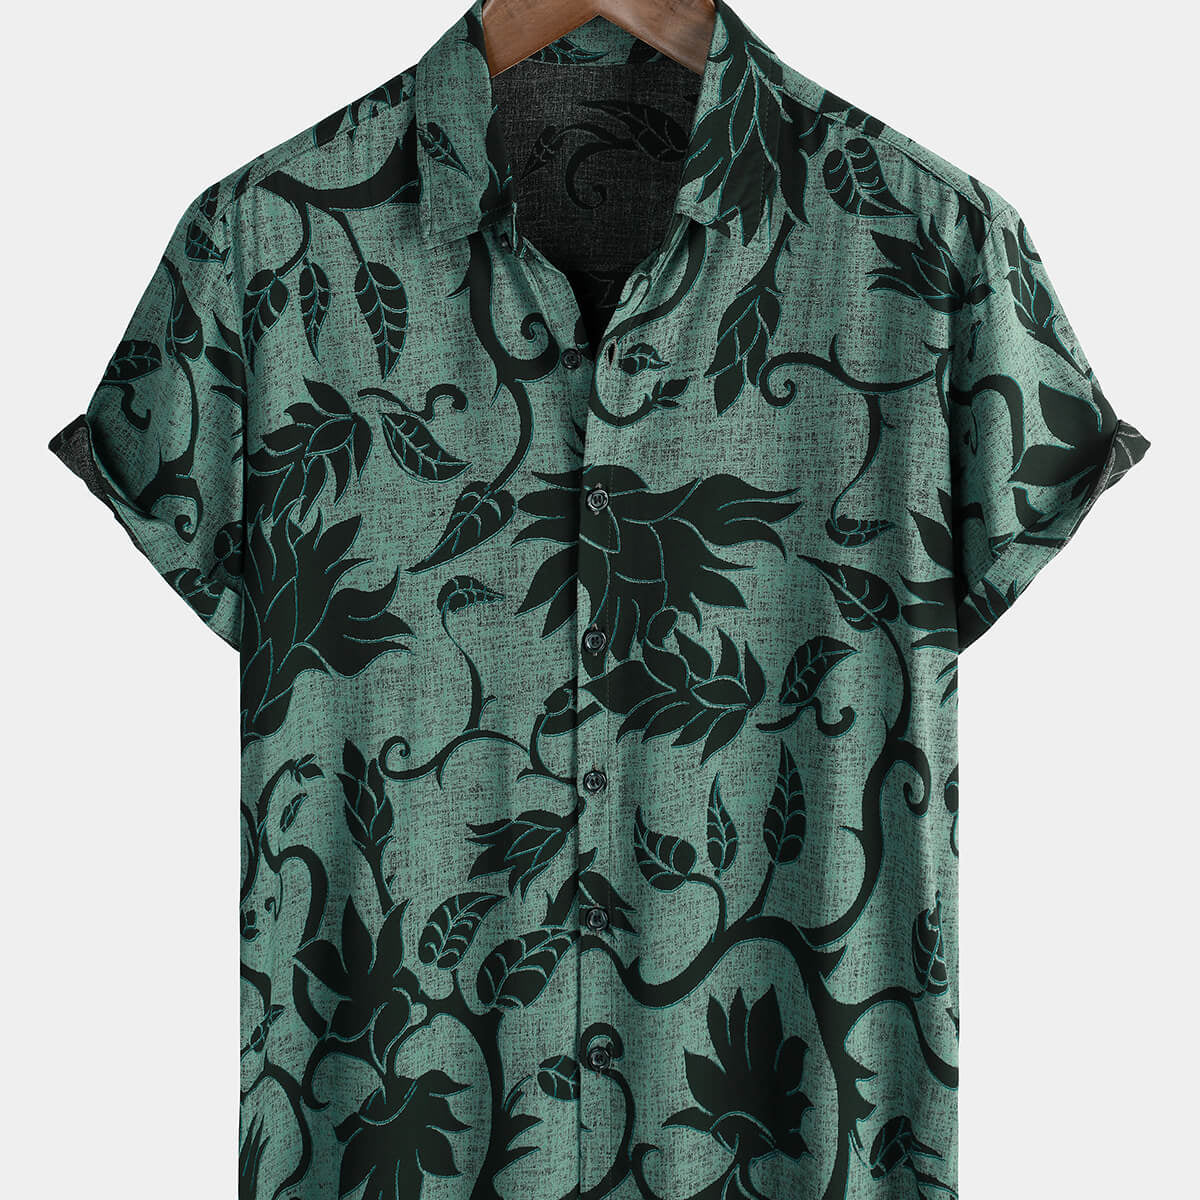 Men's Green Floral Holiday Casual Summer Short Sleeve Button Up Shirt